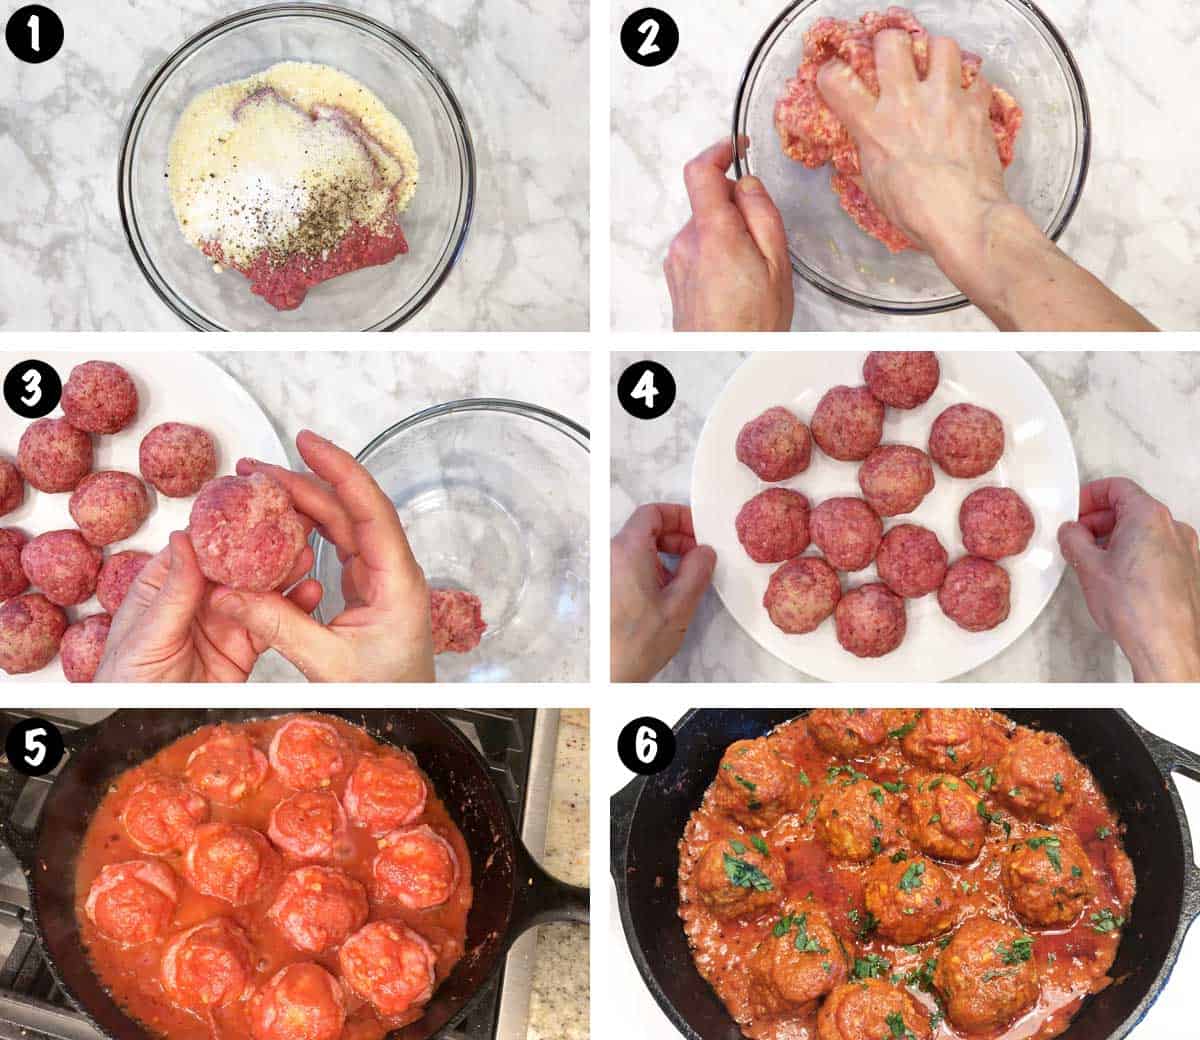 A photo collage showing the steps for making meatballs with tomato sauce. 